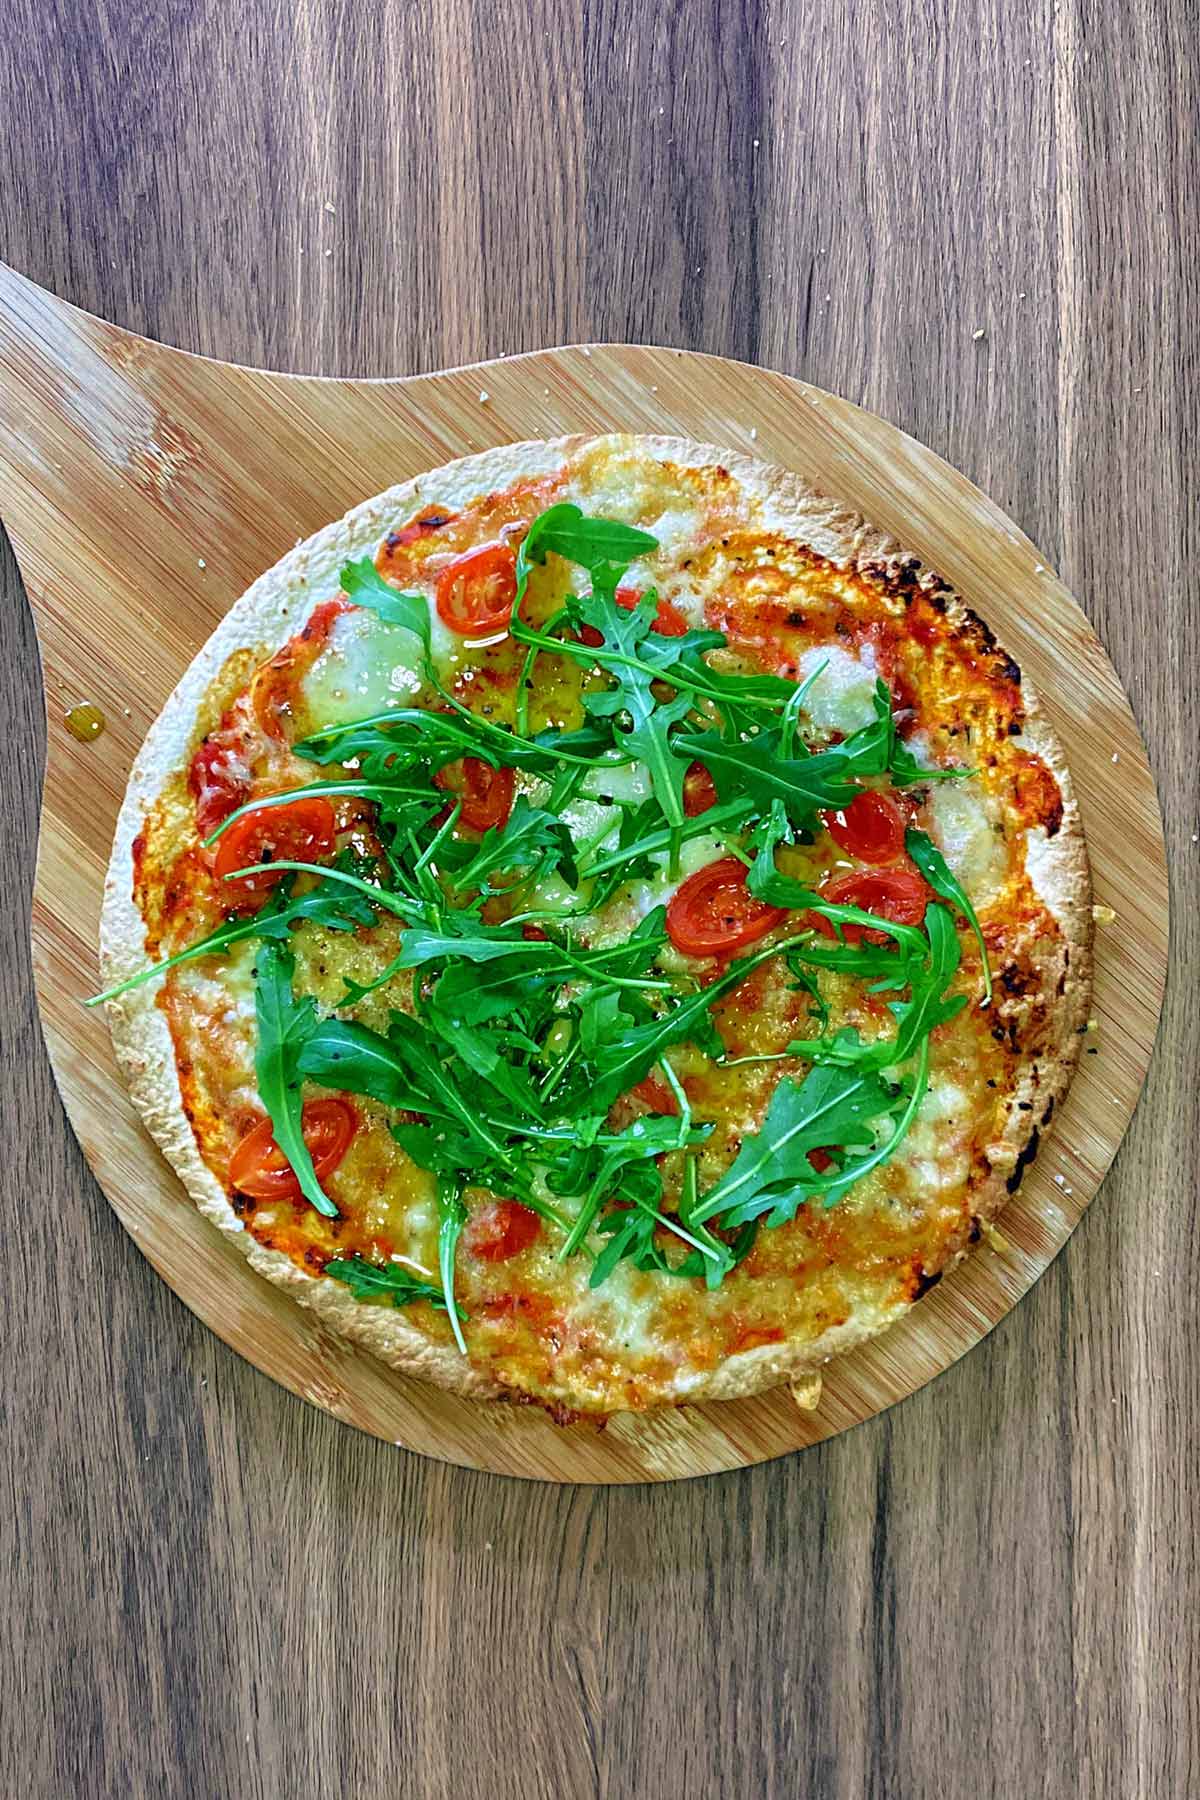 A pizza topped with rocket leaves on a wooden board.